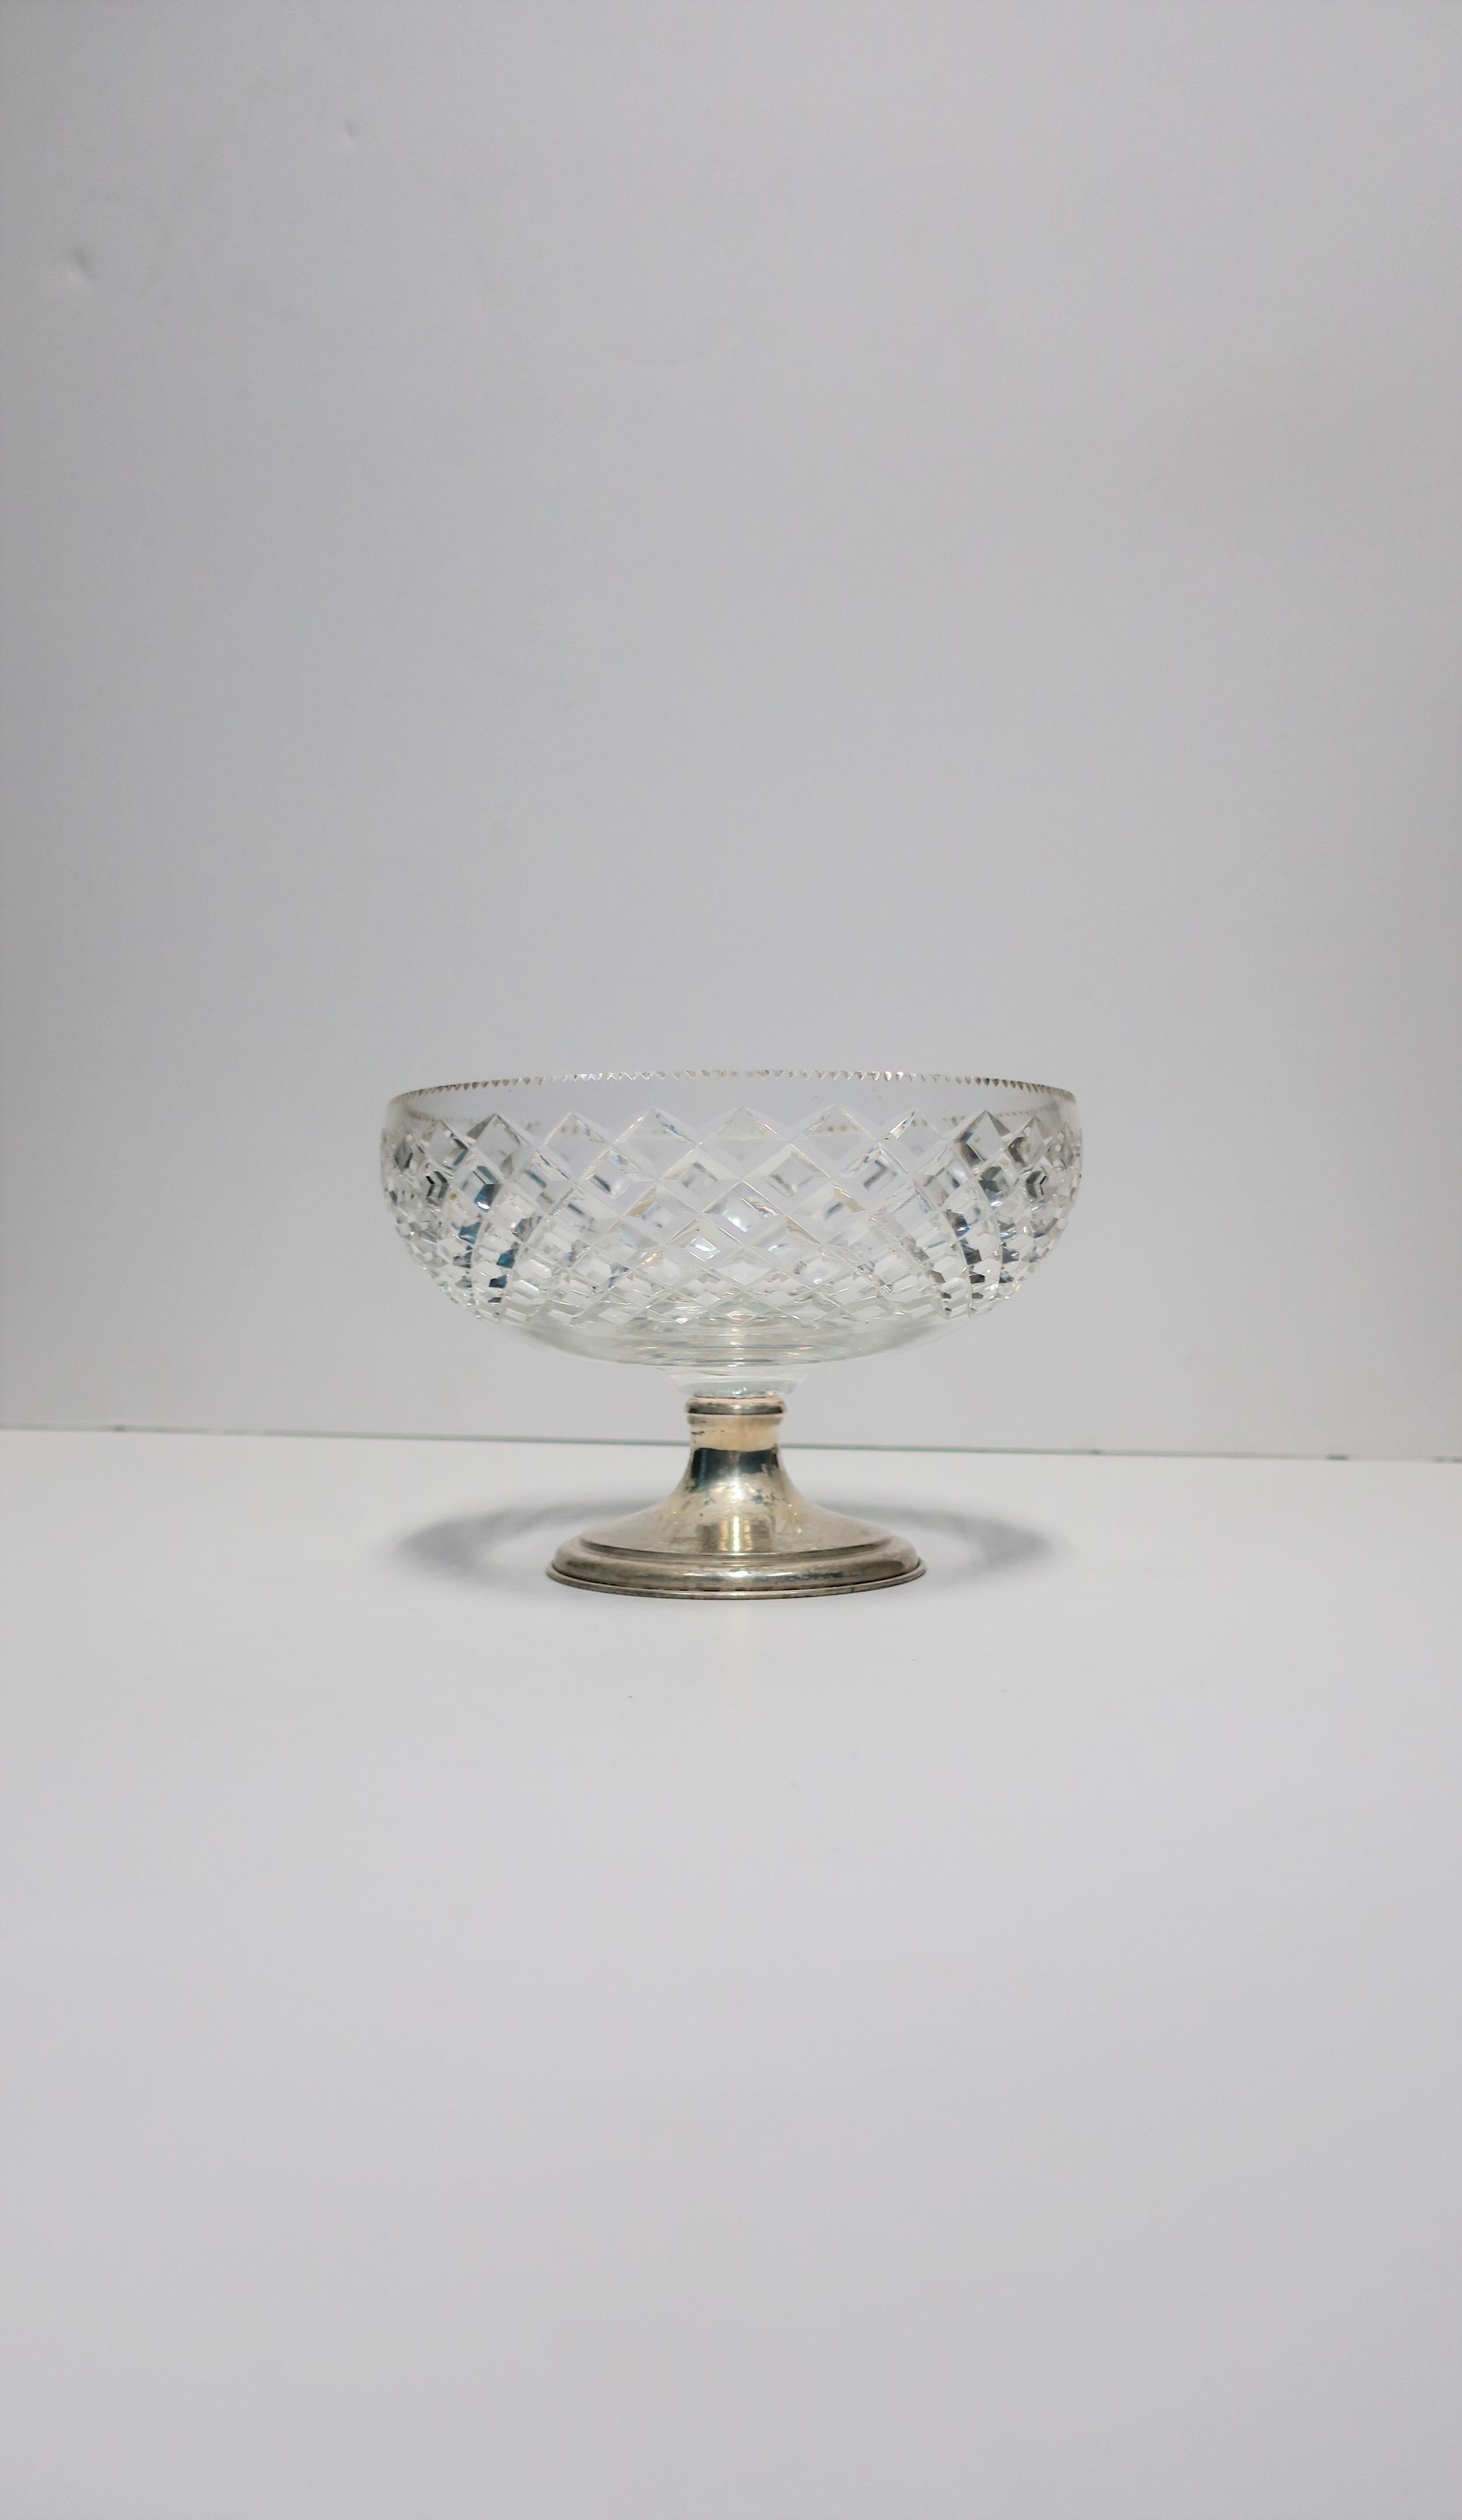 A beautiful crystal and sterling silver compote or footed bowl, by T. G. Hawkes & Co., circa early to mid-20th century, USA. Crystal bowl has cut diamond design and serrated edge with sterling silver base. Marker's mark and marked 'Sterling' on